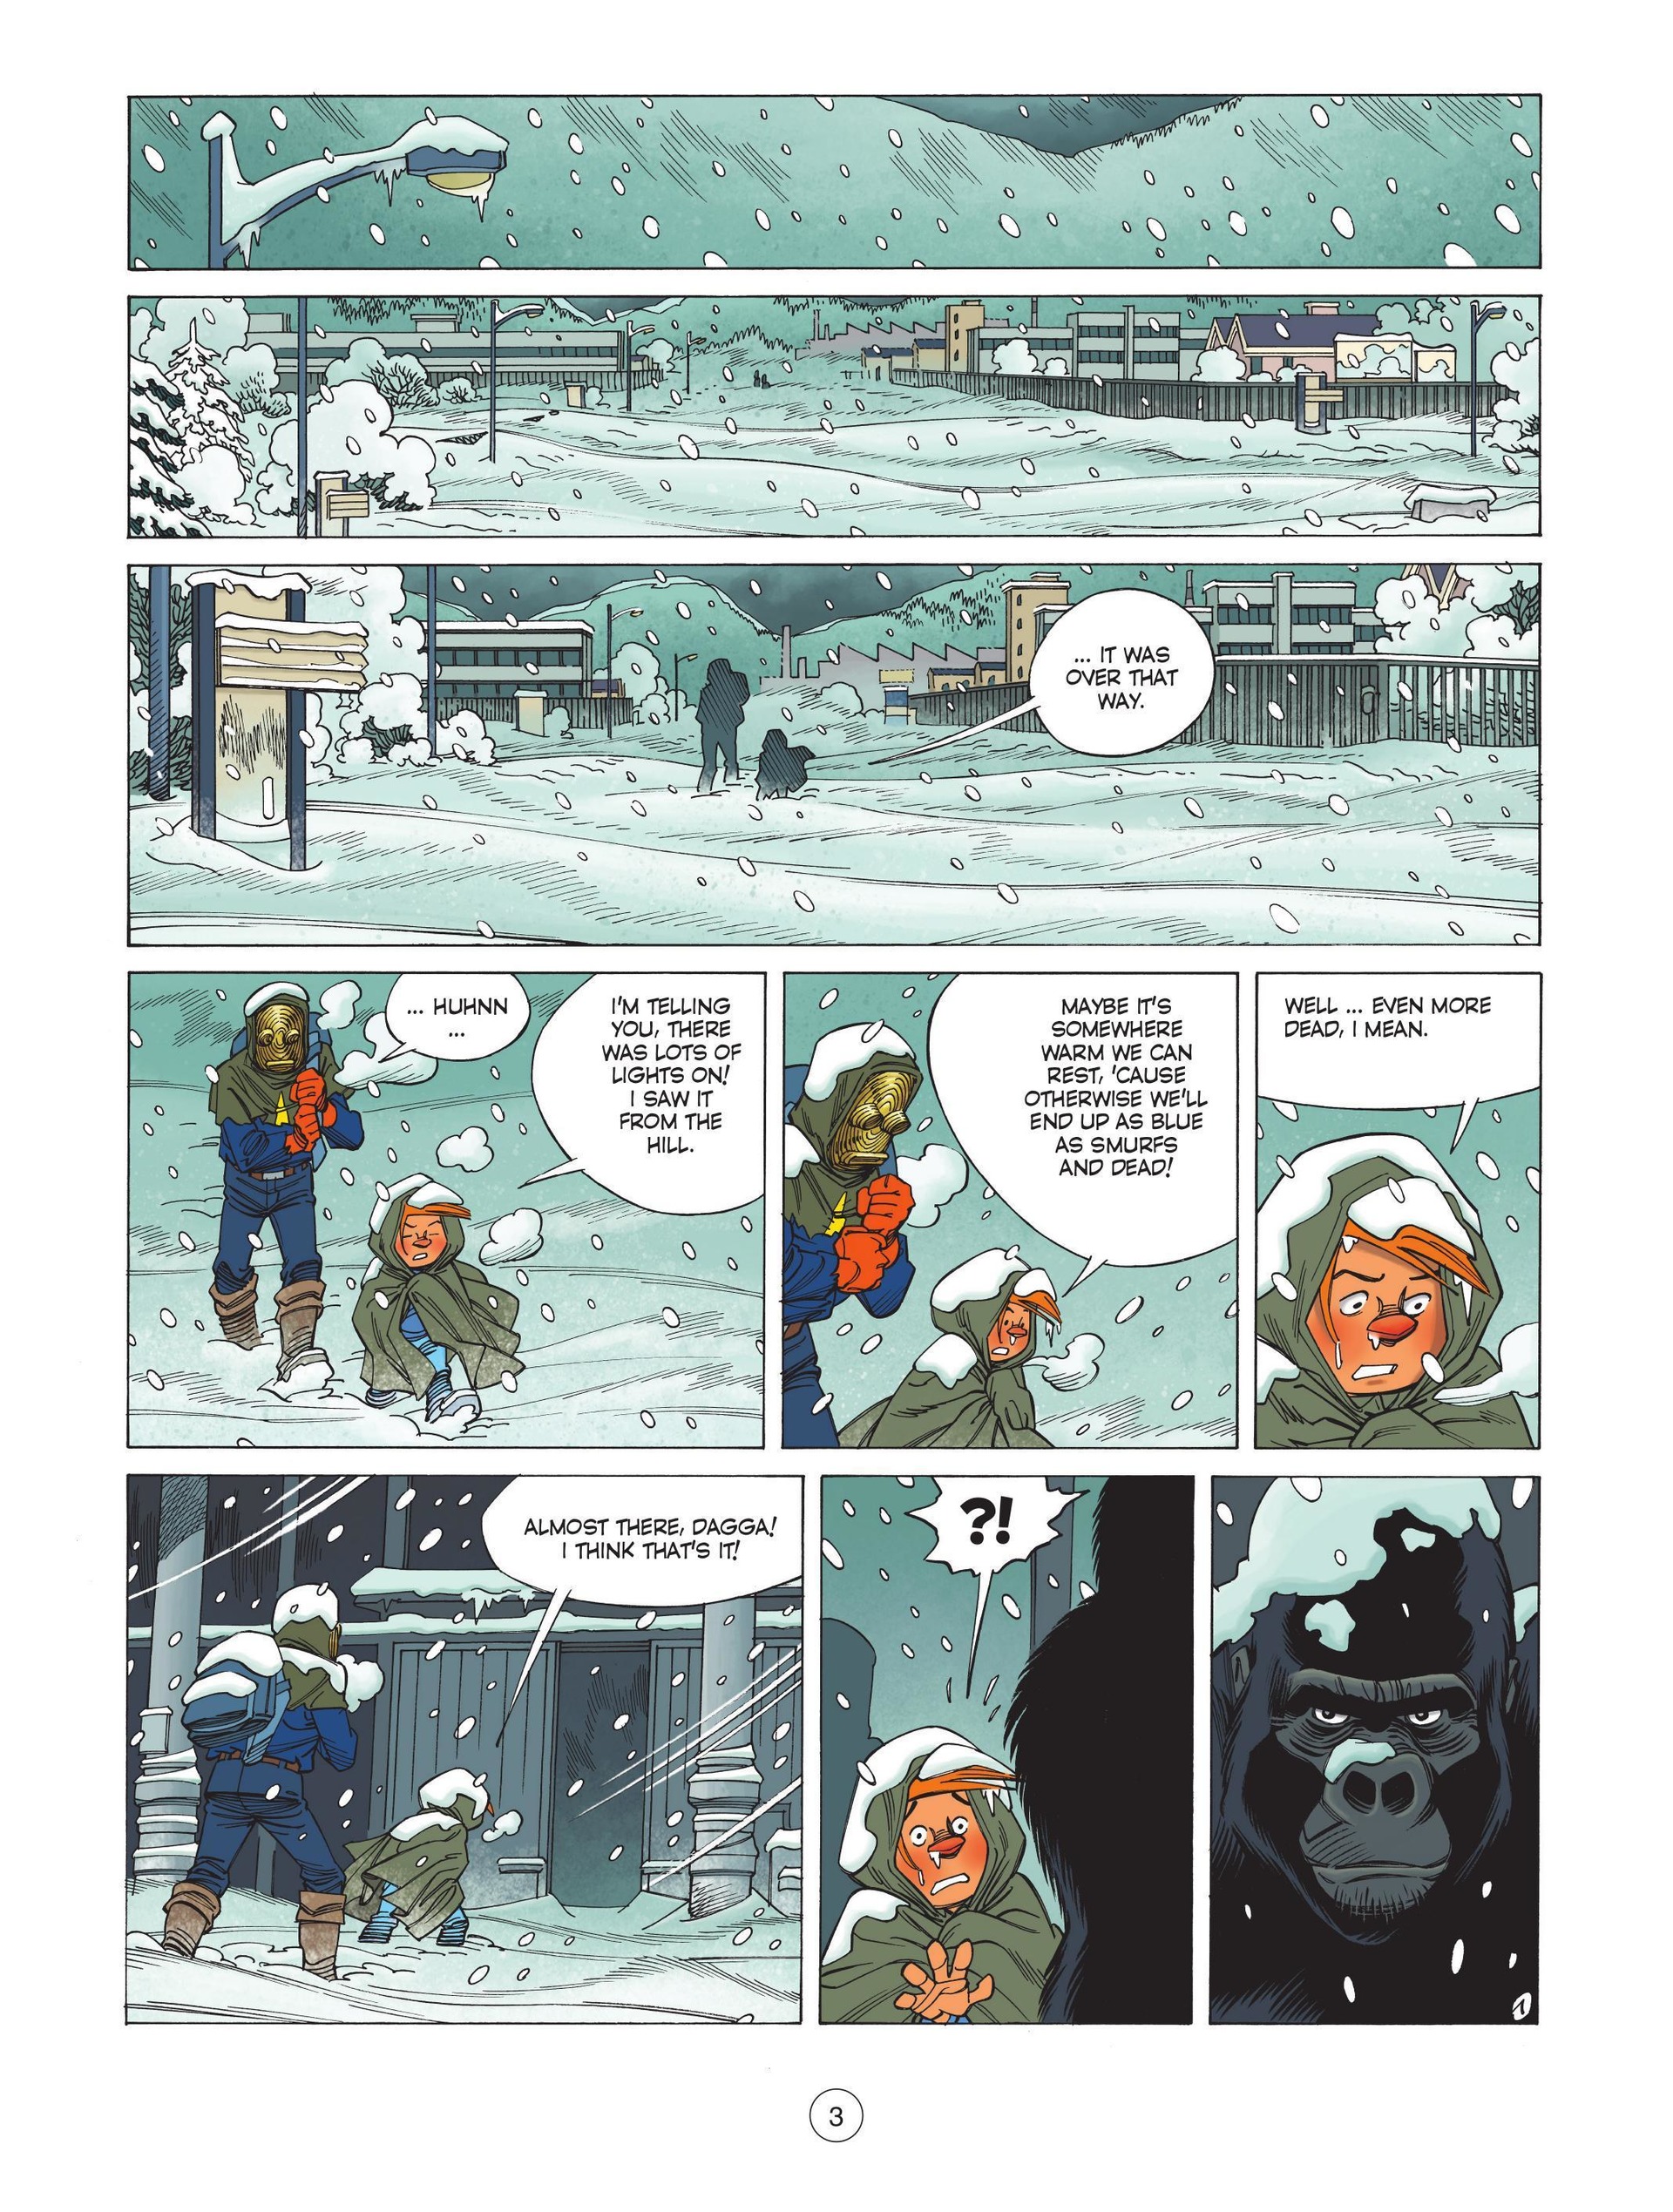 Alone (2014-): Chapter 10 - Page 5